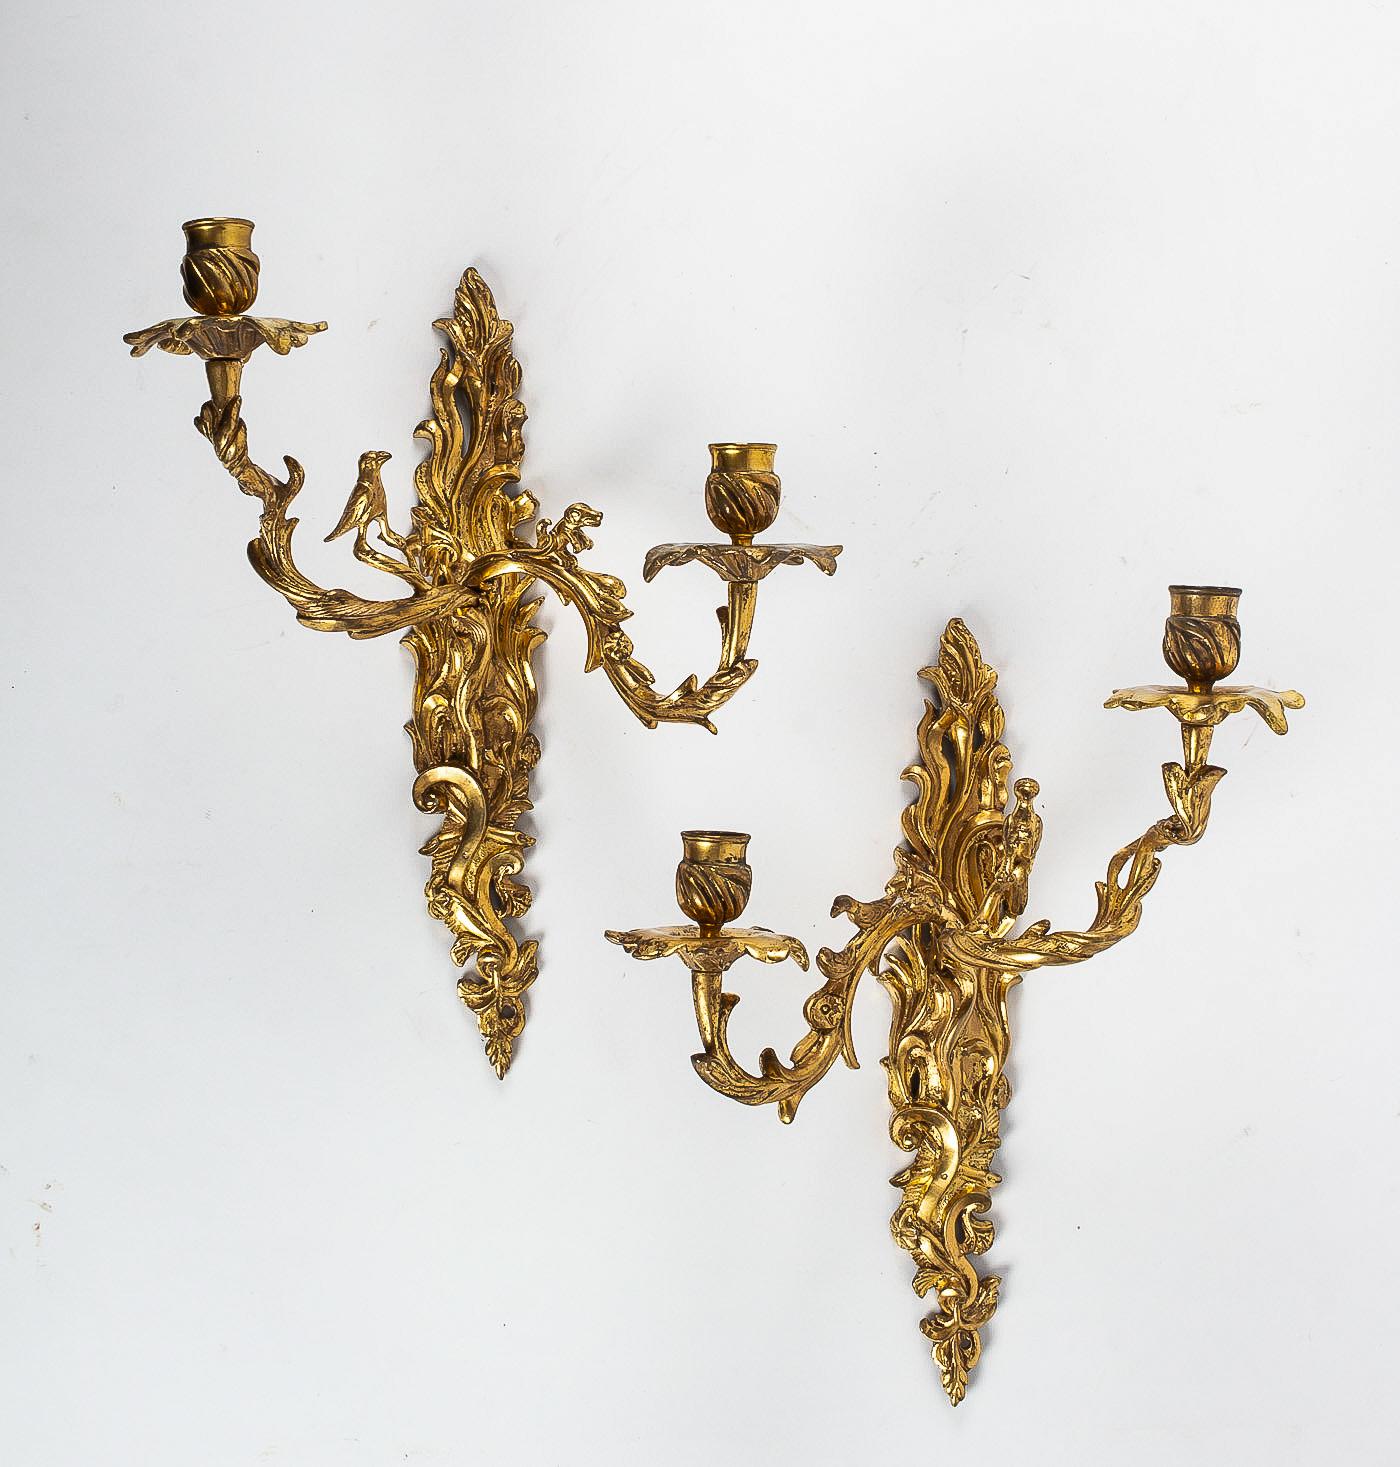 Crowned C Mark, Rare Pair of Hunting Design Ormolu Louis XV Period Sconces For Sale 12